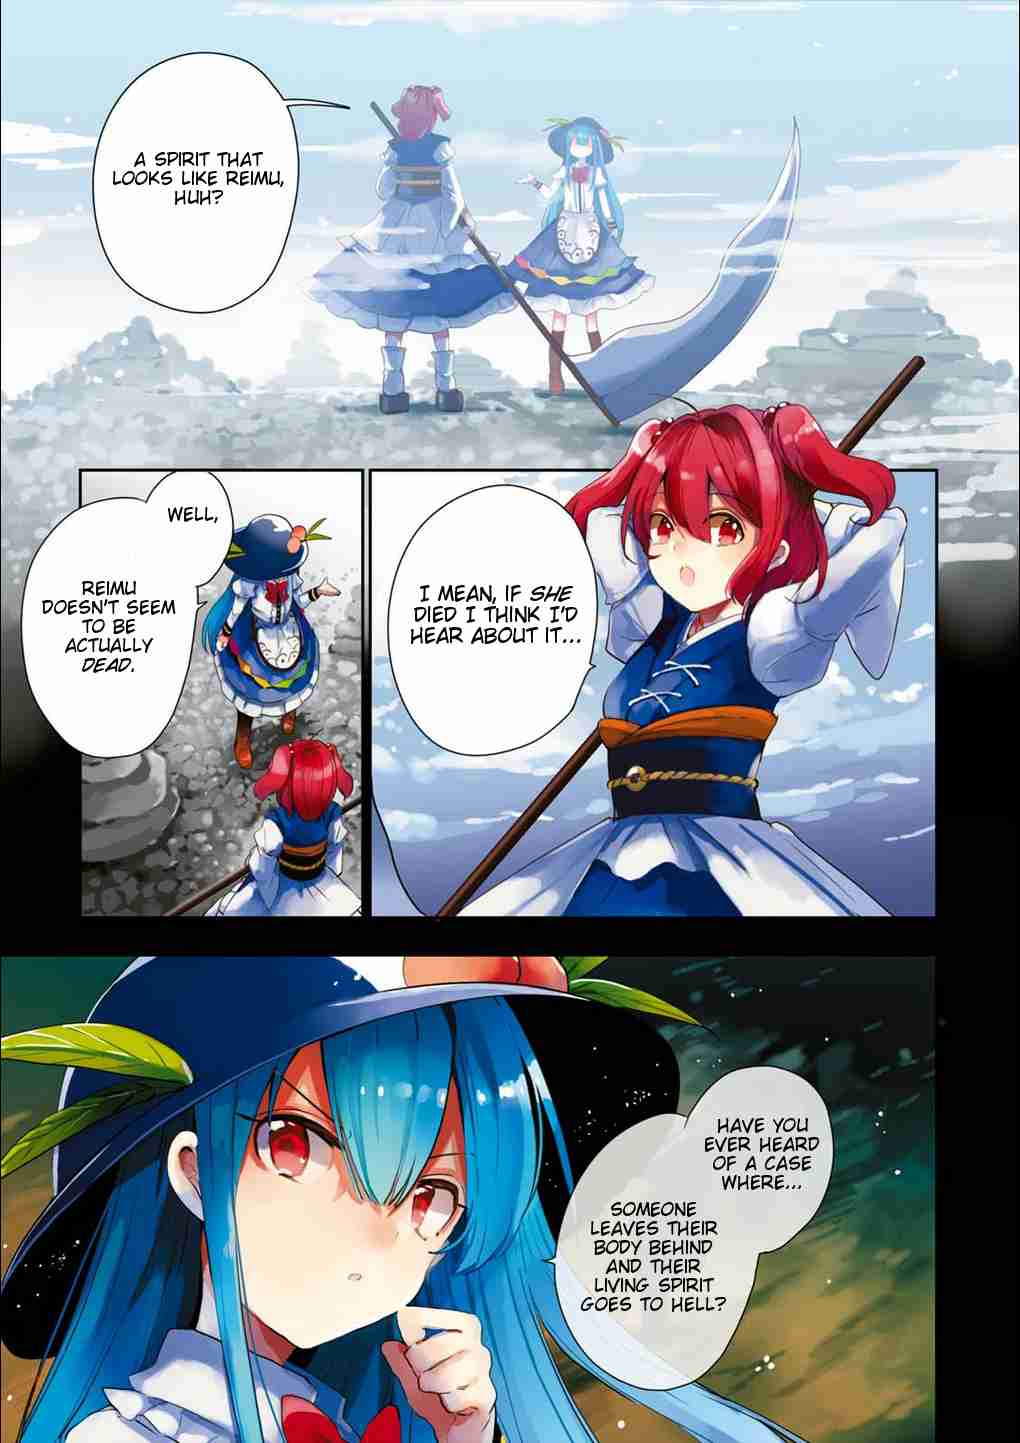 Touhou Ibara Kasen ~ Wild and Horned Hermit. Vol. 10 Ch. 48 Not Stopping to Ask for Direction in the Land of Darkness